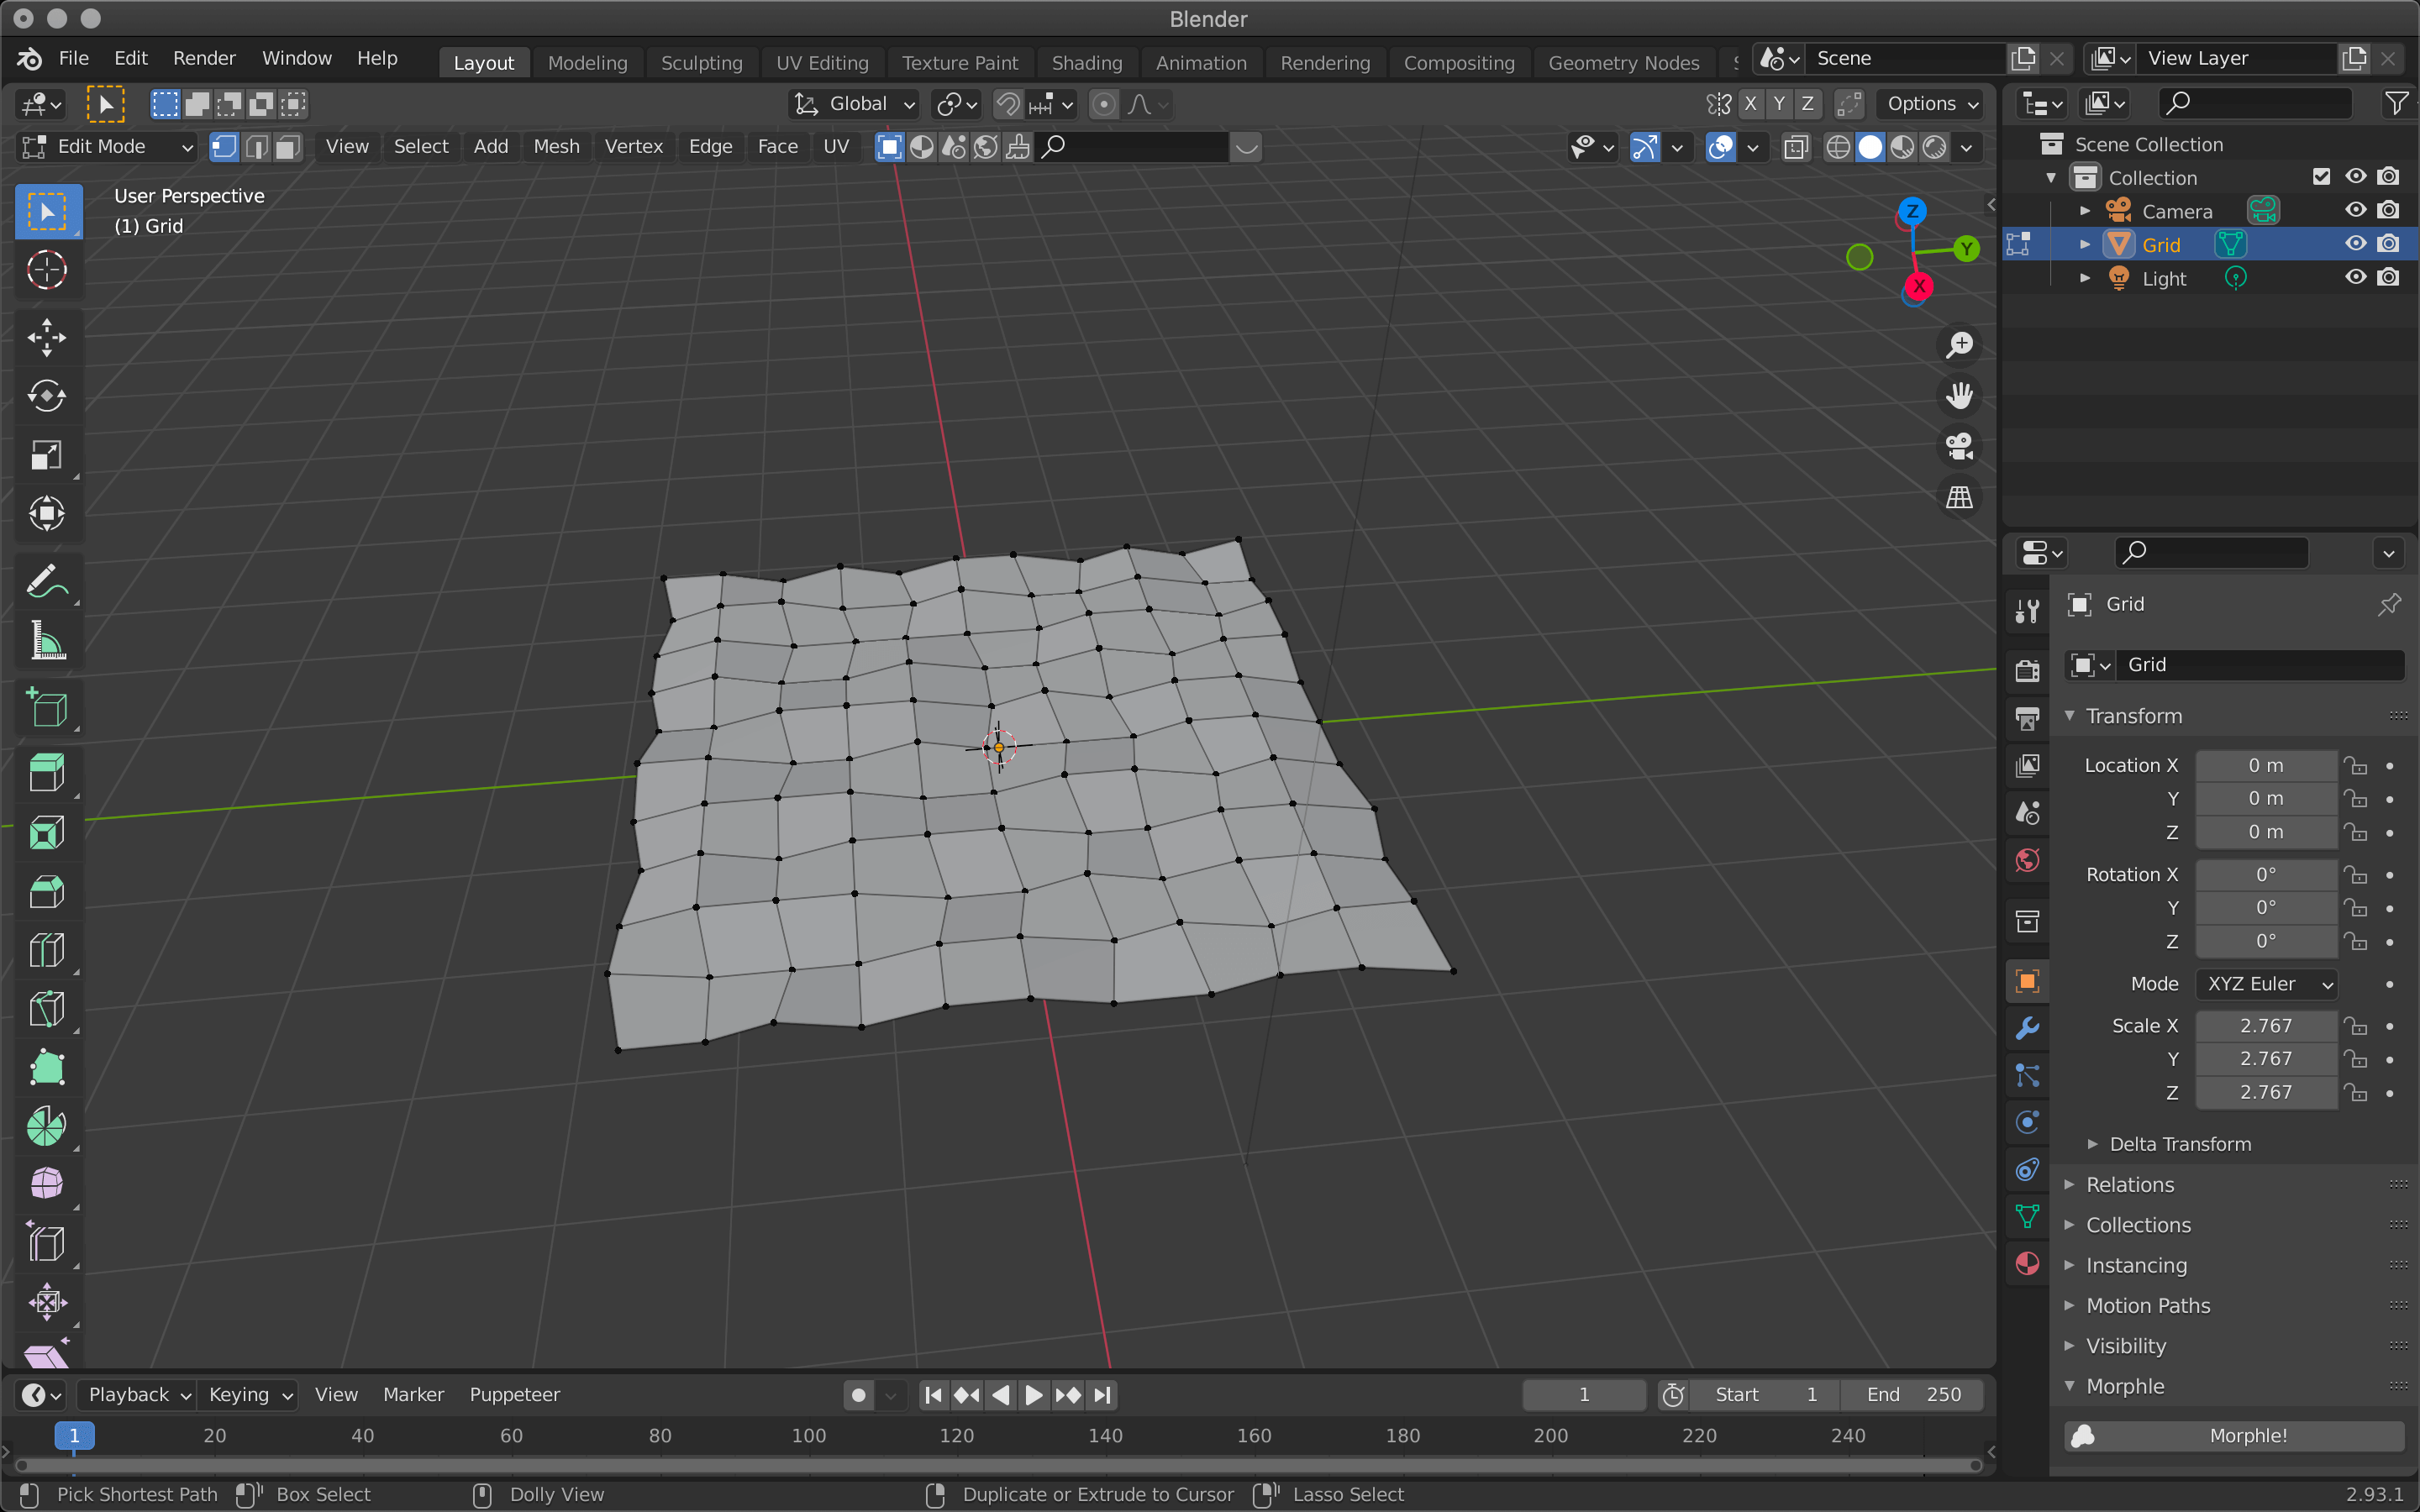 Blender Add-on] Organize meshes with Volume Preserving Smoothing